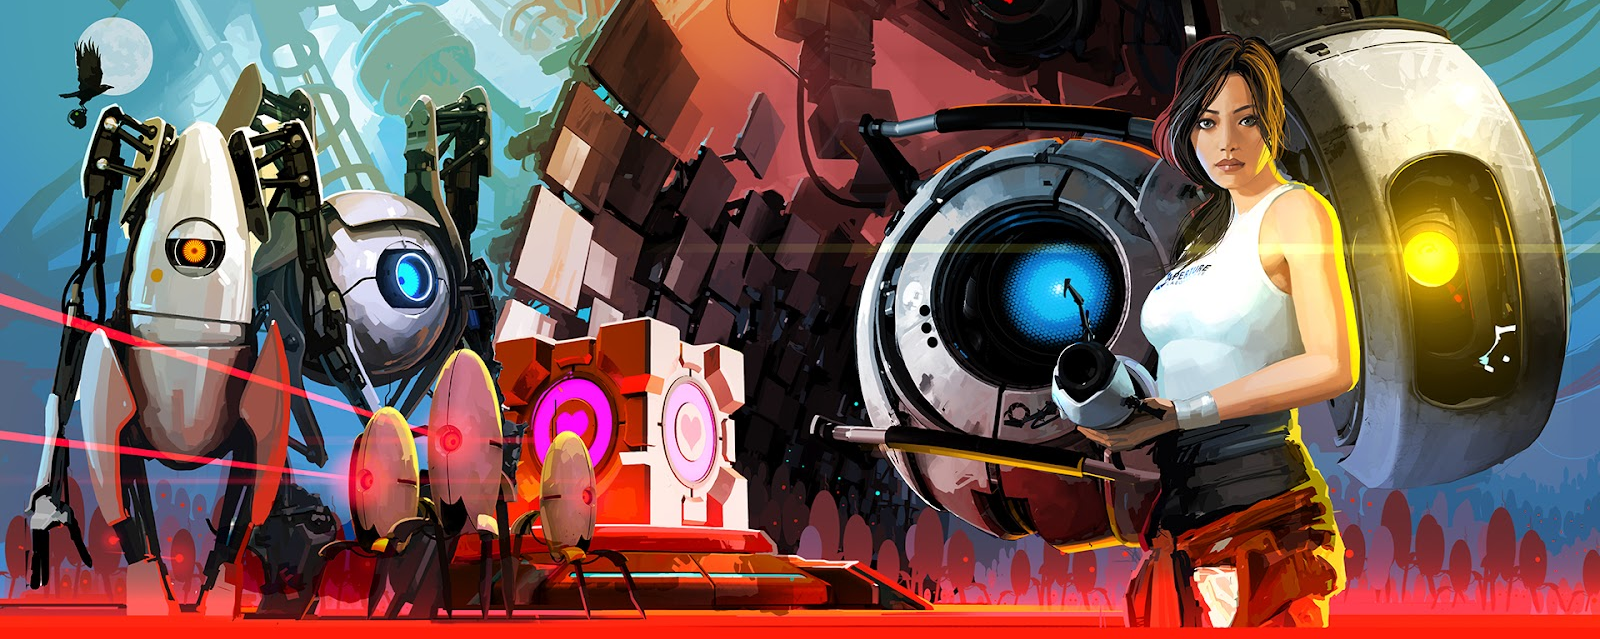 Promotional image for Portal 2. It features (from left to right) P-Body, Atlas, 3 turrets, the companion cube, Wheatley, Chell, and Glados. They are all staring at the camera.